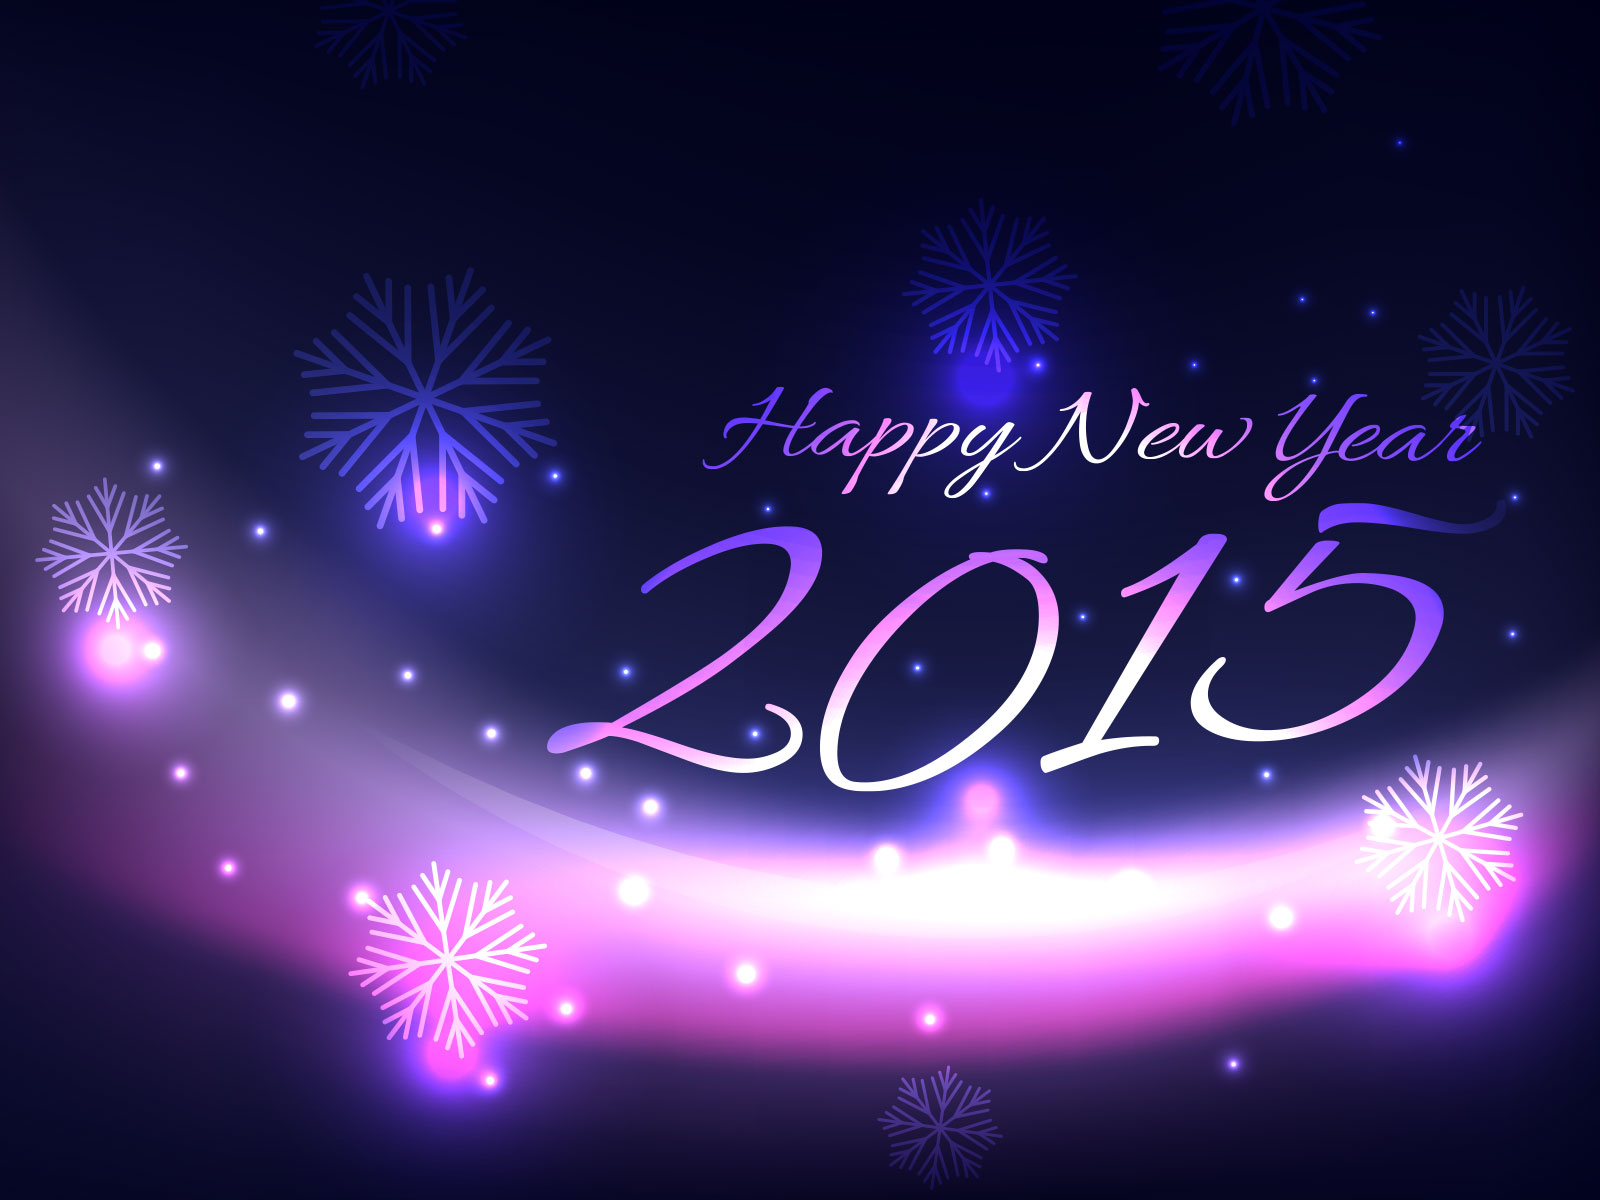 Happy New Year Wallpaper Image Amp Cover Photos